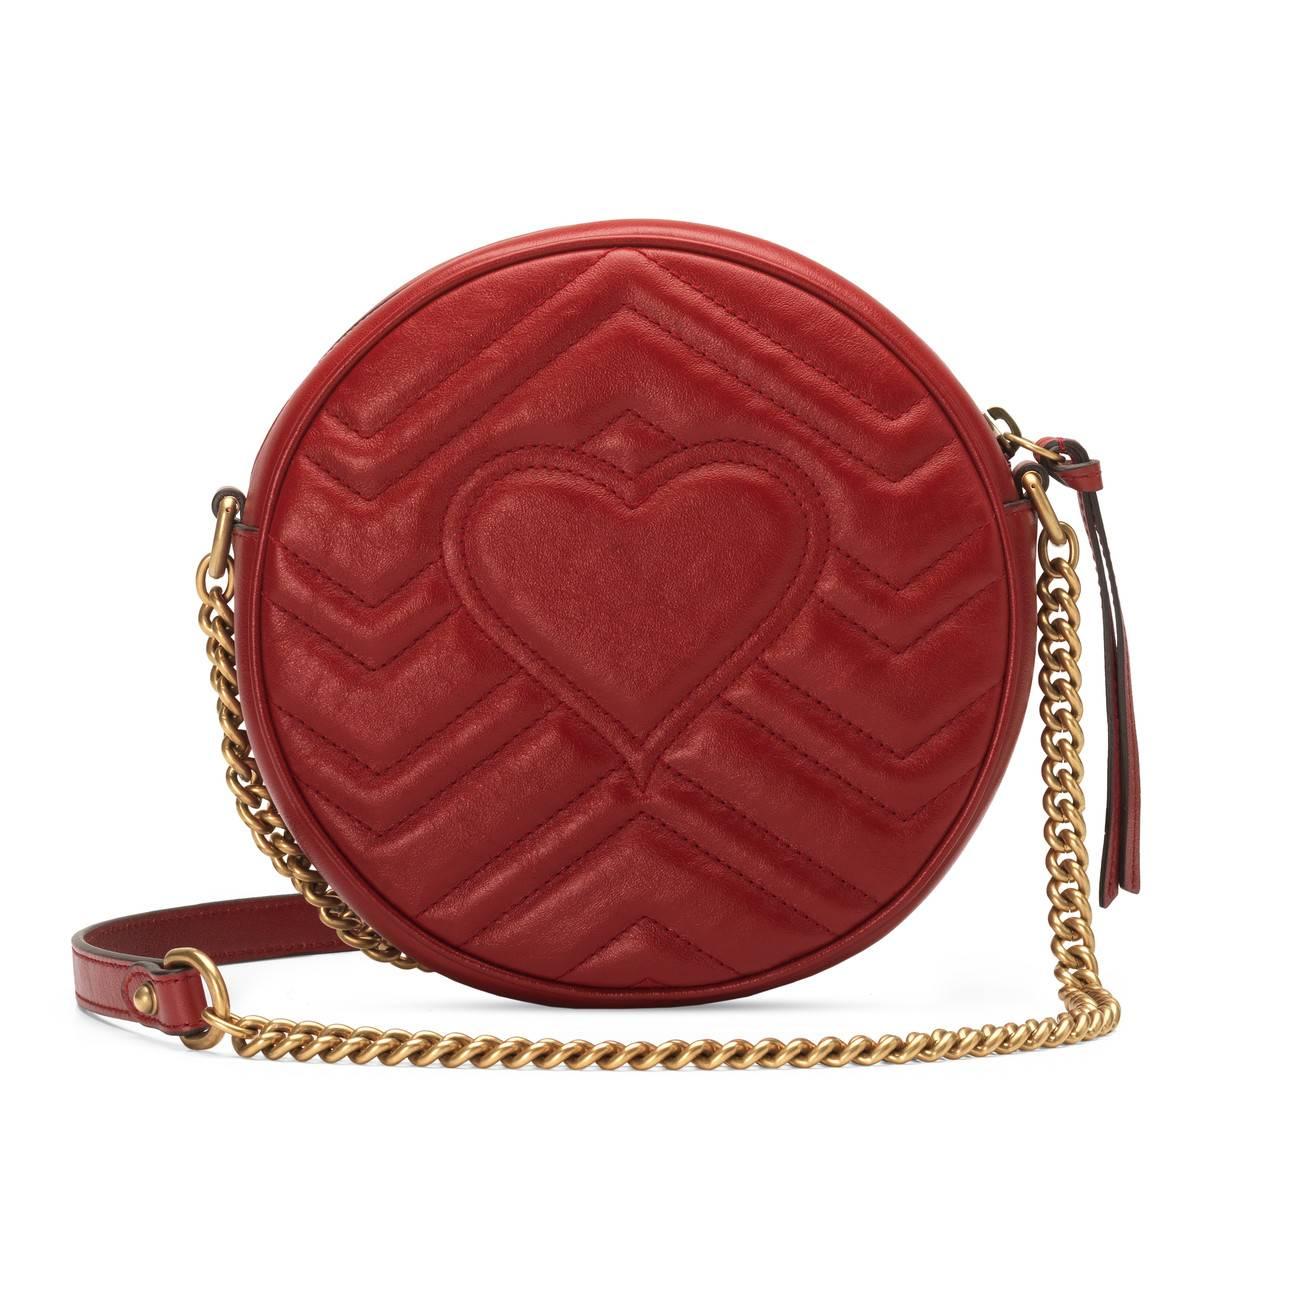 Gucci Leather GG Marmont Mini Round Shoulder Bag in Red - Lyst